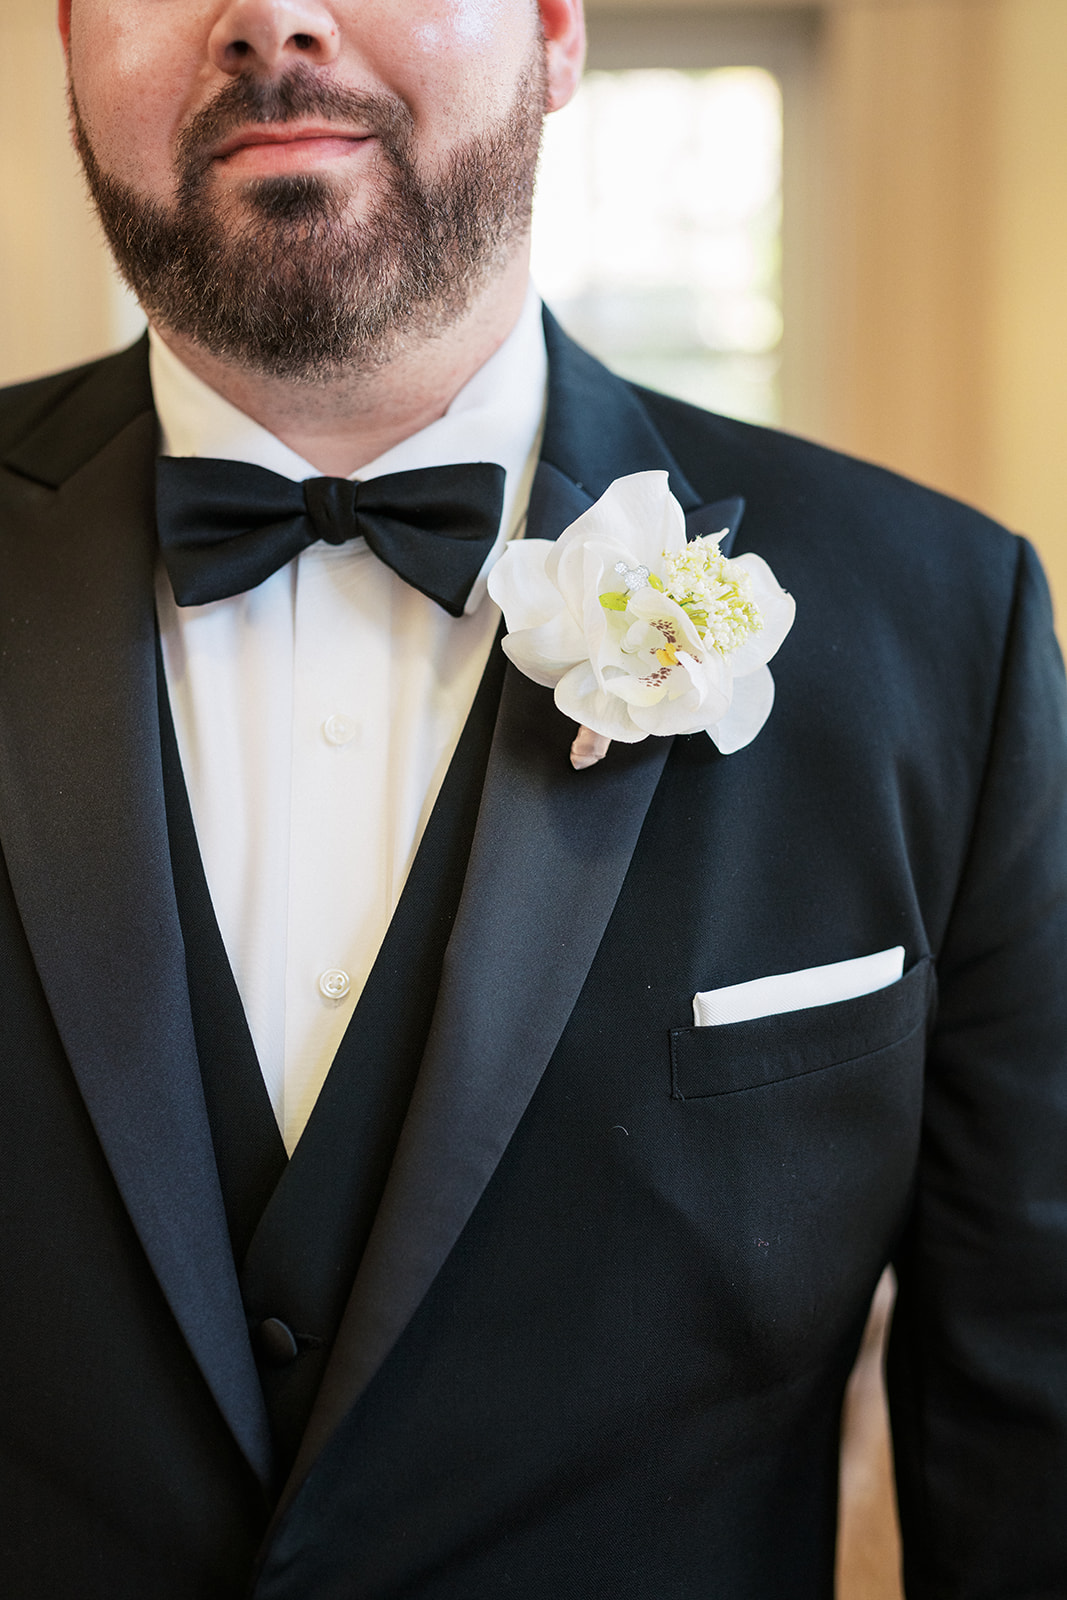 Details of a groom's white boutonniere on his black tuxedo jacket at a Park Avenue Club Wedding